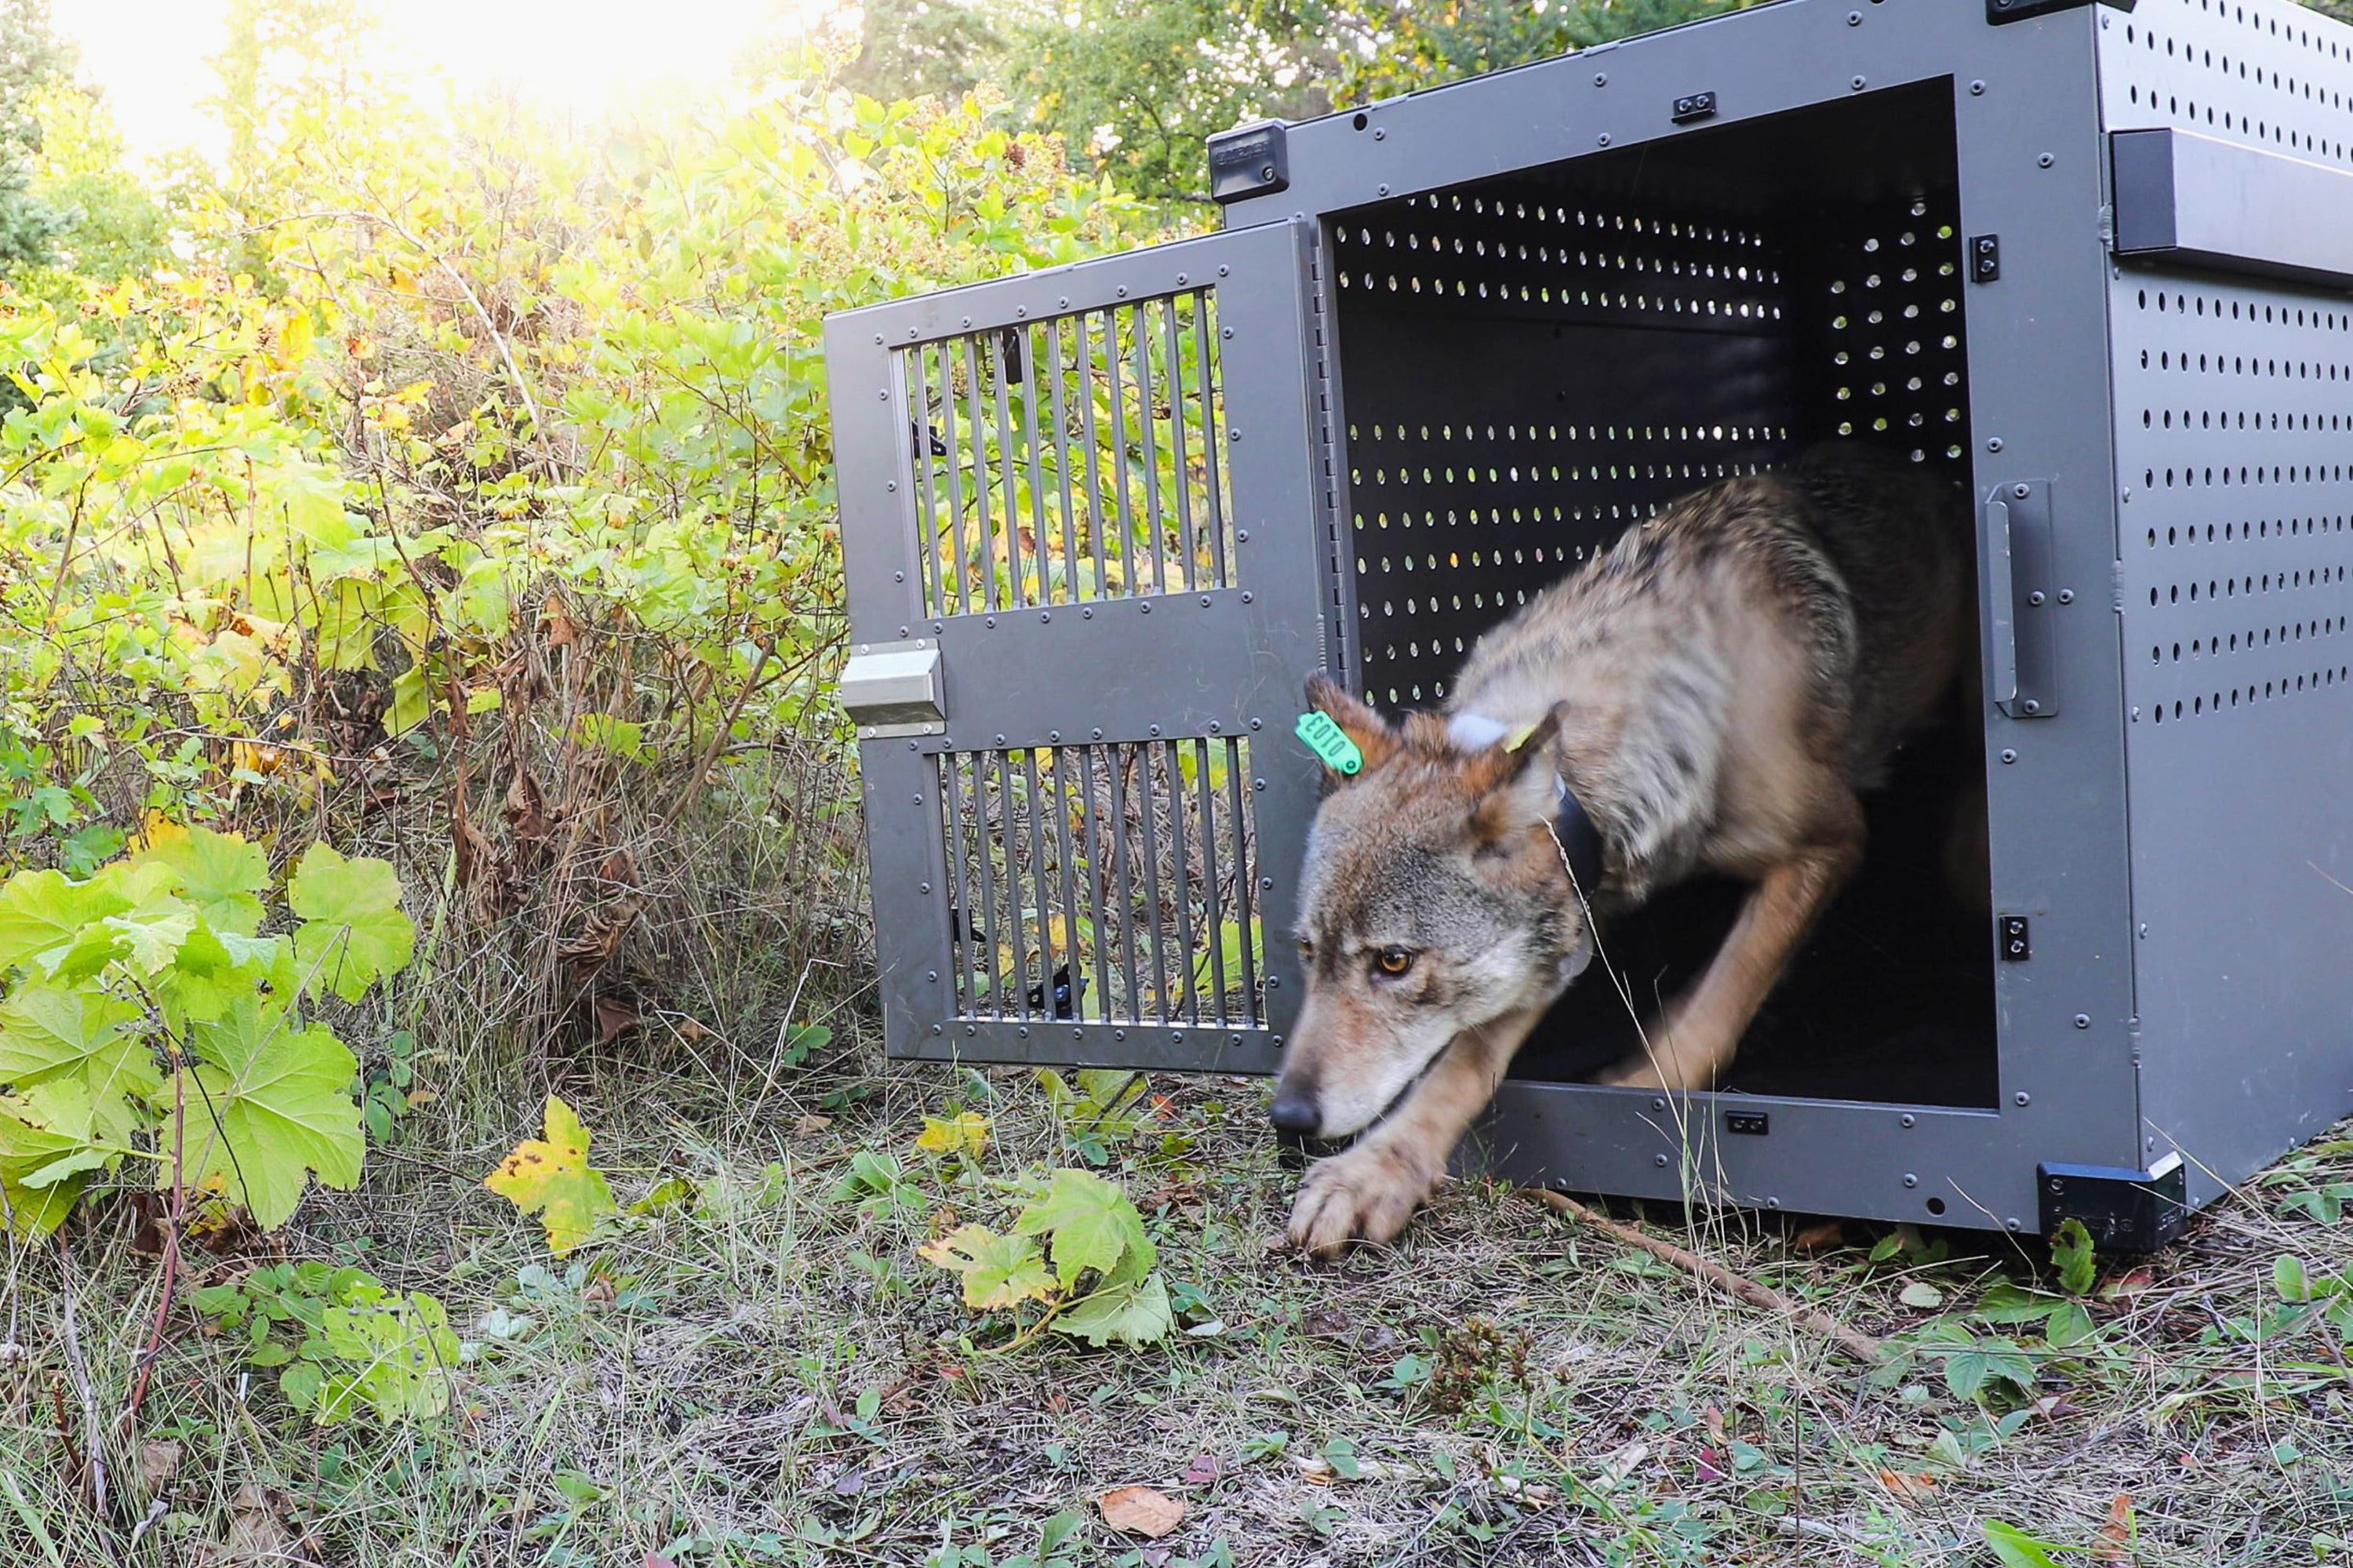 FILE - This Sept. 26, 2018 file photo provided by the National Park Service shows a 4-year-old female gray wolf emerging from her cage at Isle Royale National Park in Michigan.  Environmental research projects on endangered animals and air and water quality are being delayed and disrupted by the monthlong partial federal government shutdown and not just those conducted by government agencies.